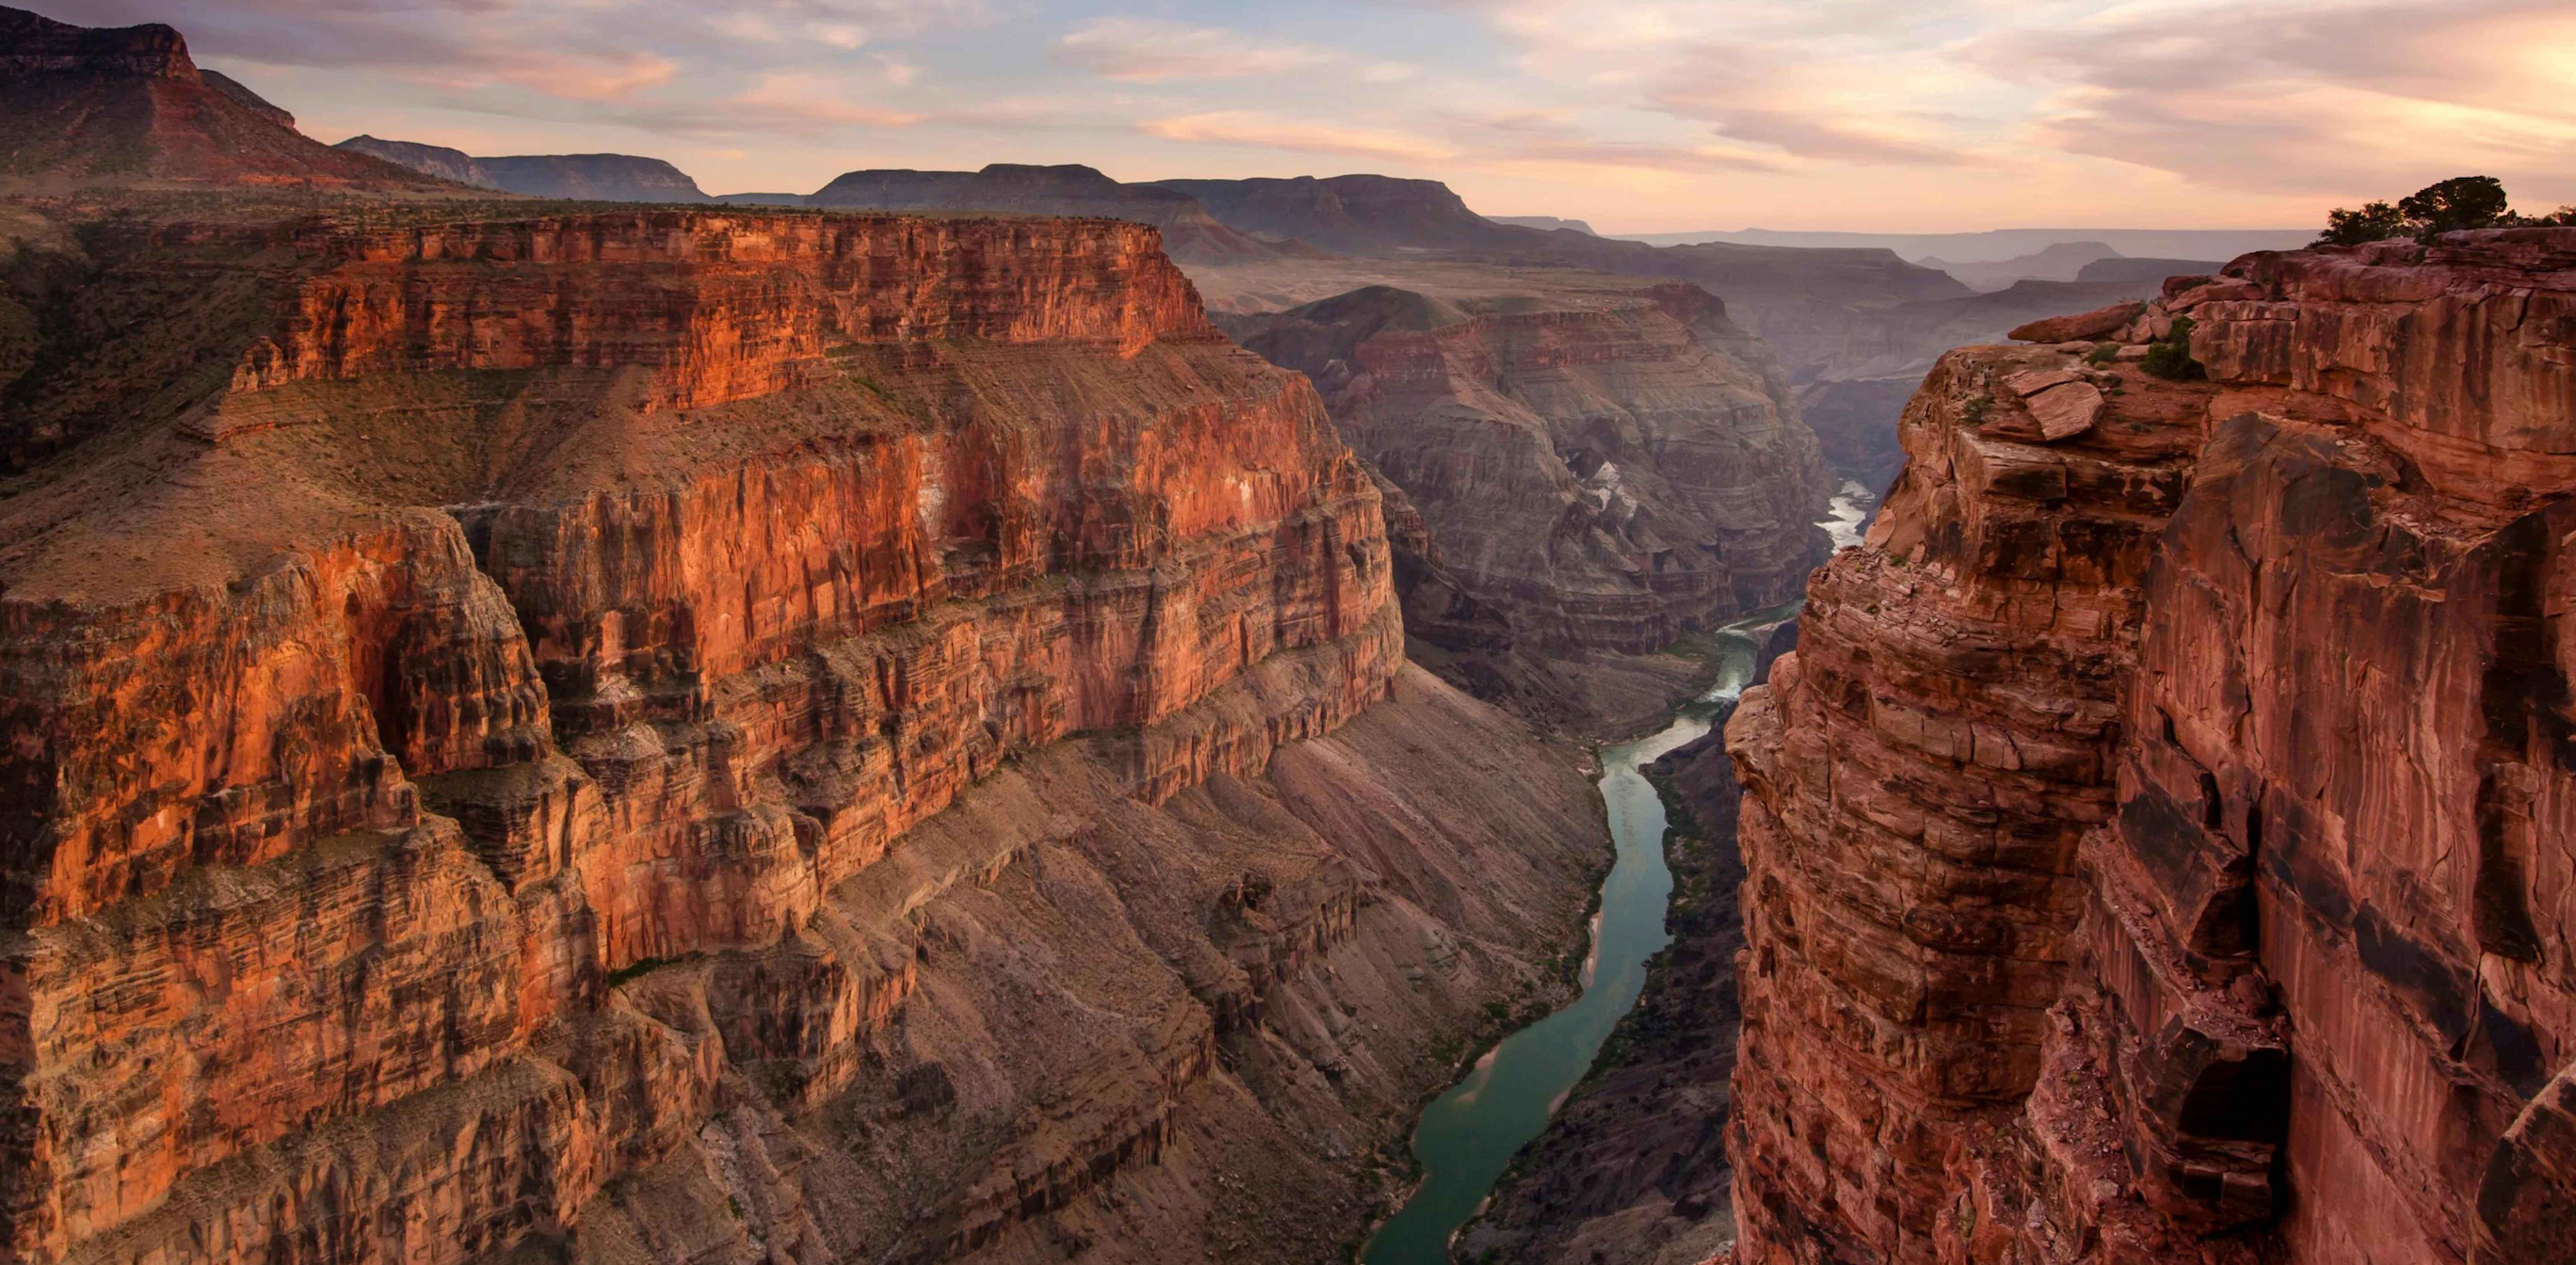 5 Grand Facts About the Grand Canyon